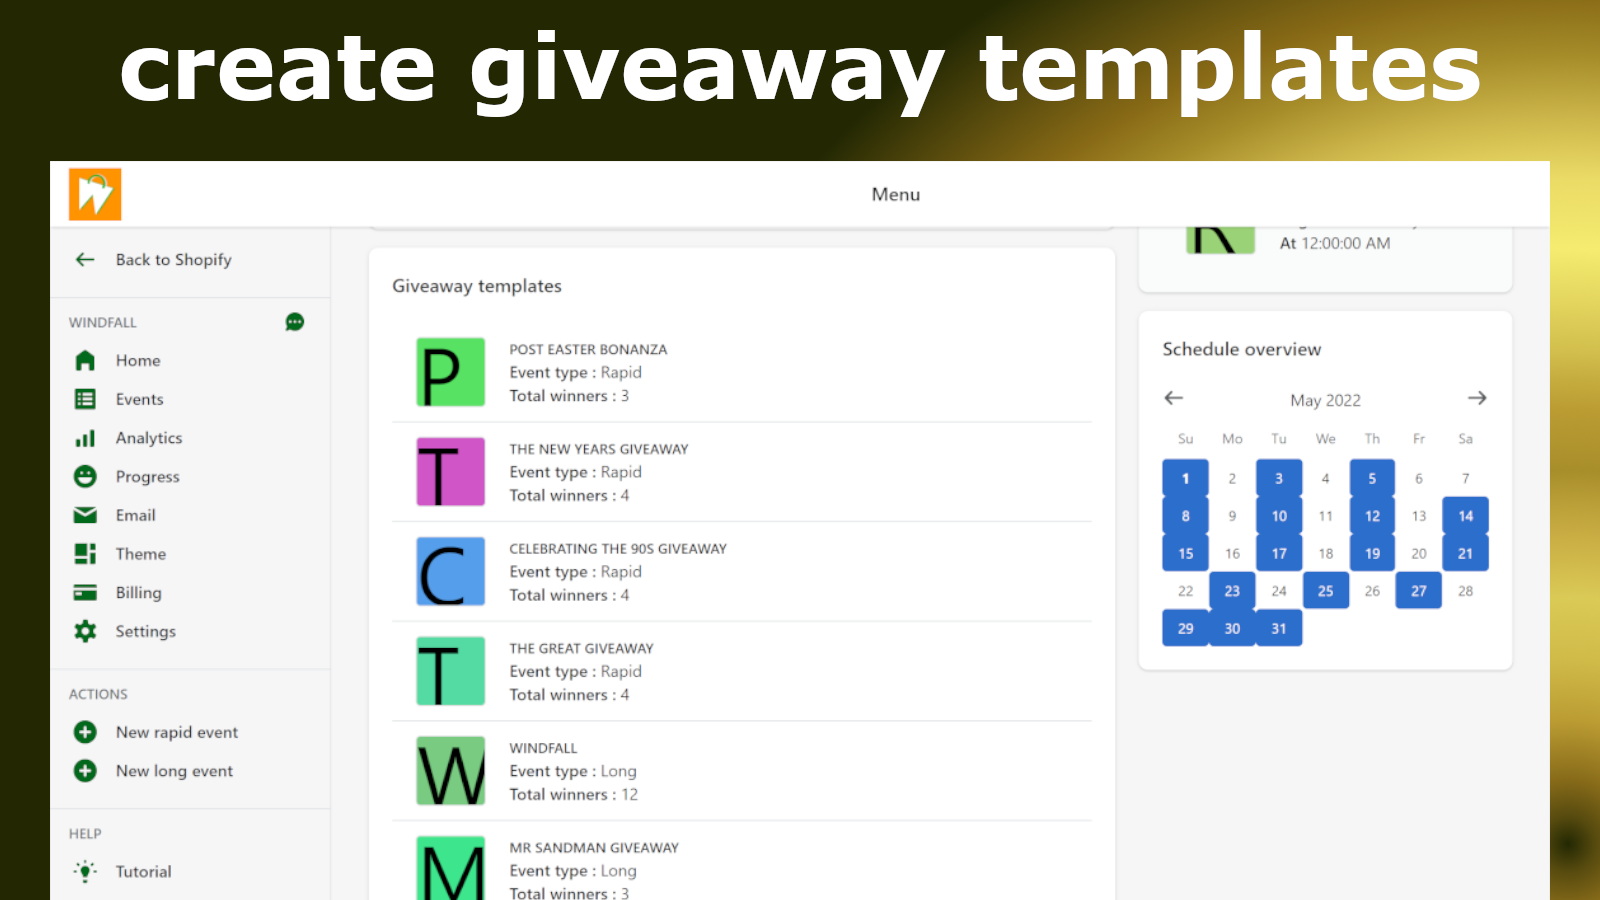 Create giveaway templates